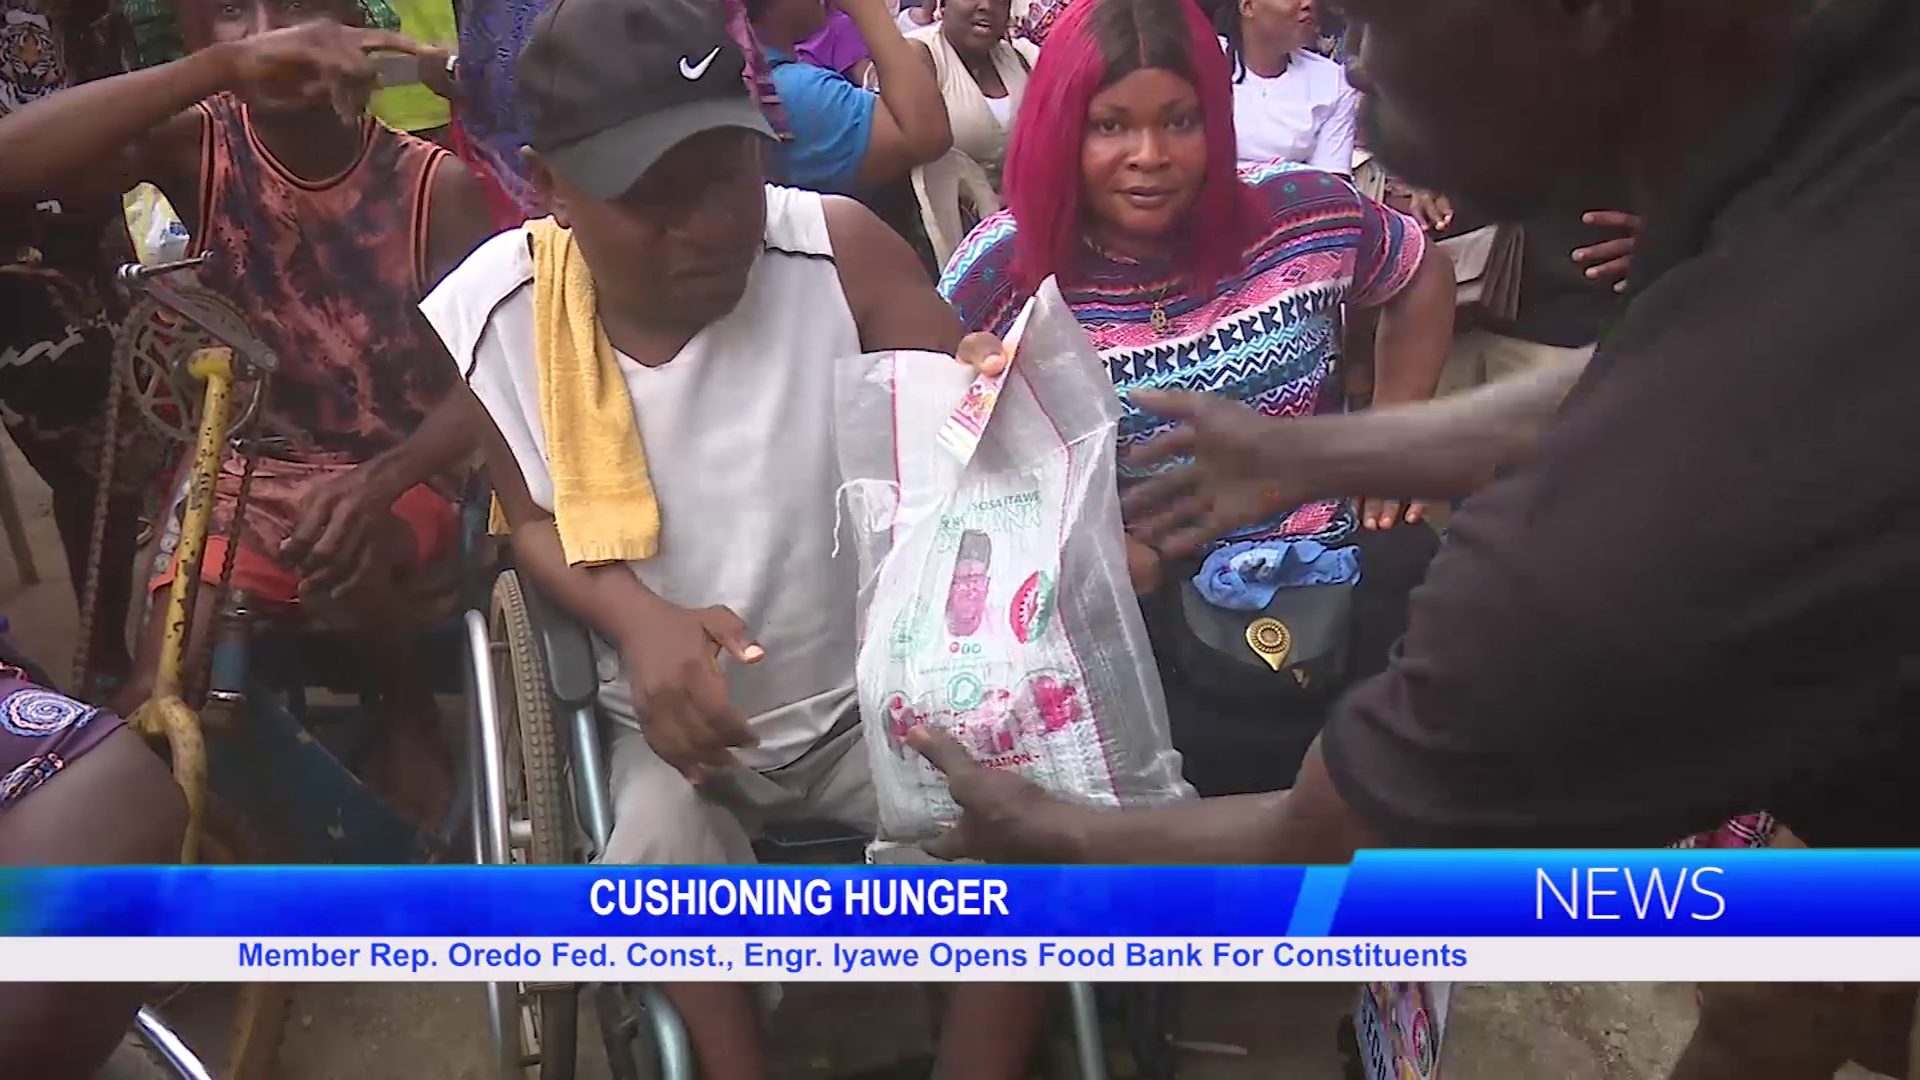 Member Rep. Oredo Fed. Const., Engr. Iyawe Opens Food Bank For Constituents